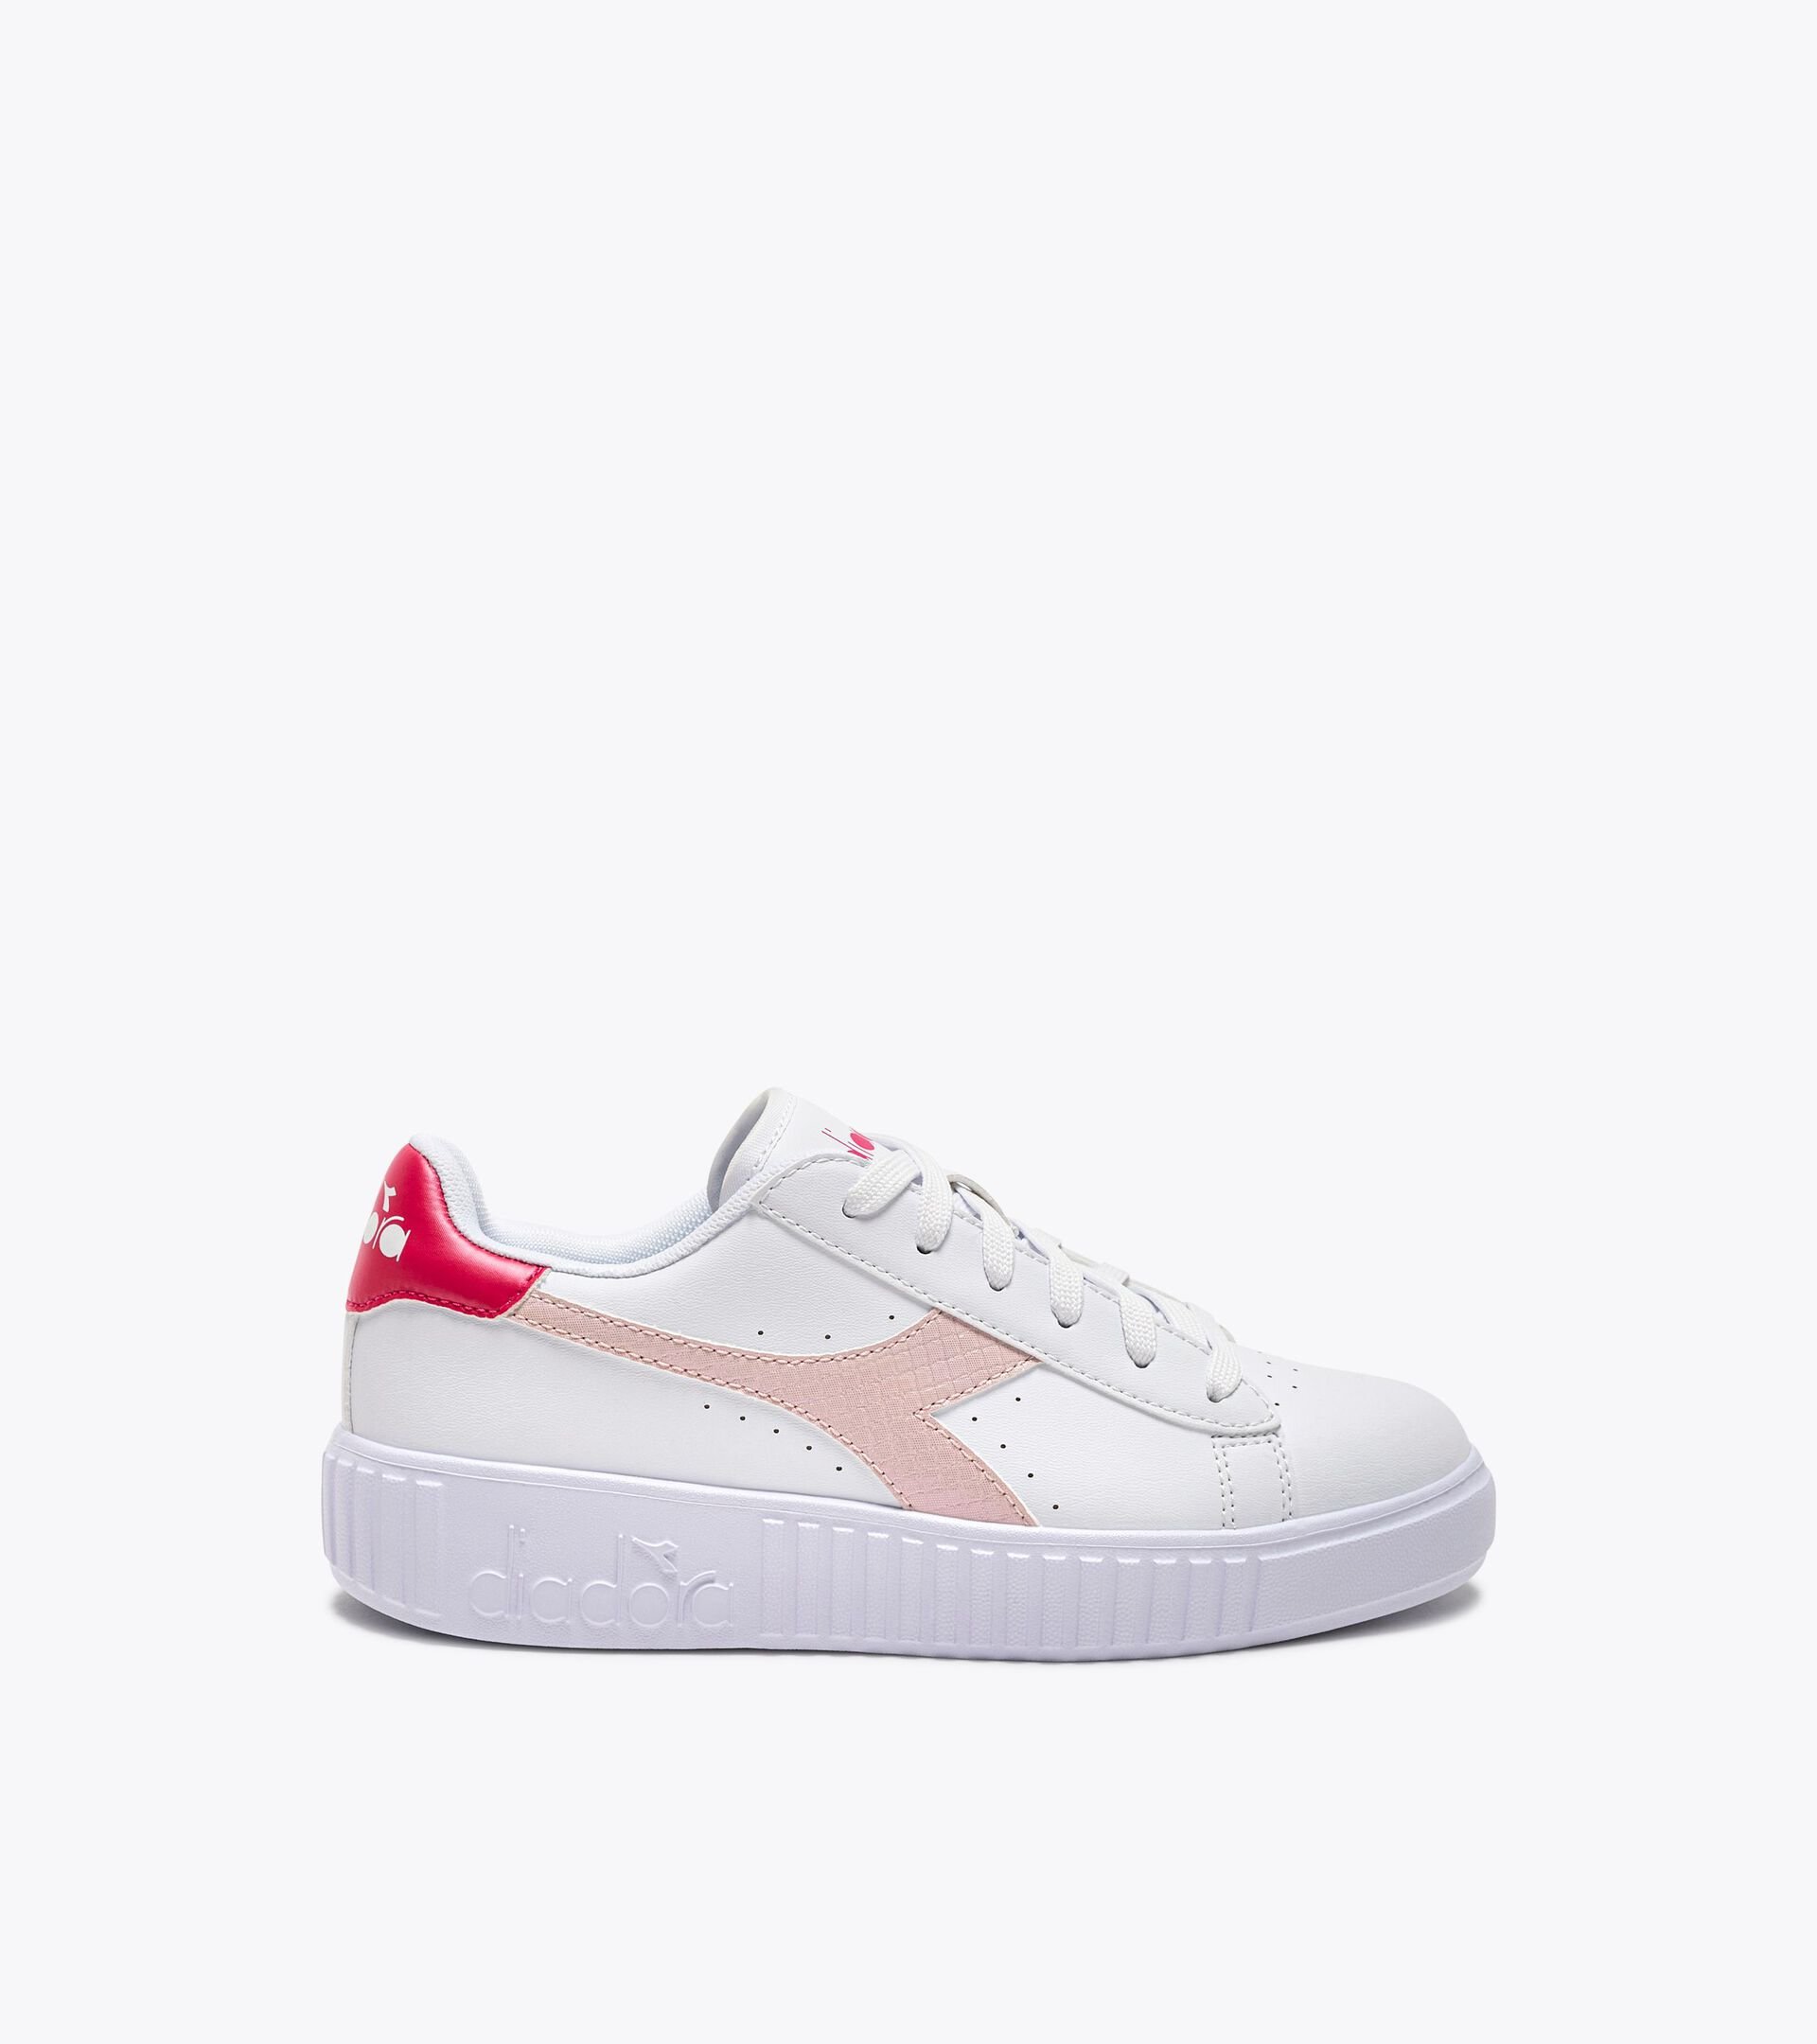 Sports shoes - Youth - 8-16 years
 GAME STEP GS GLAZED BEETROOT PINK - Diadora